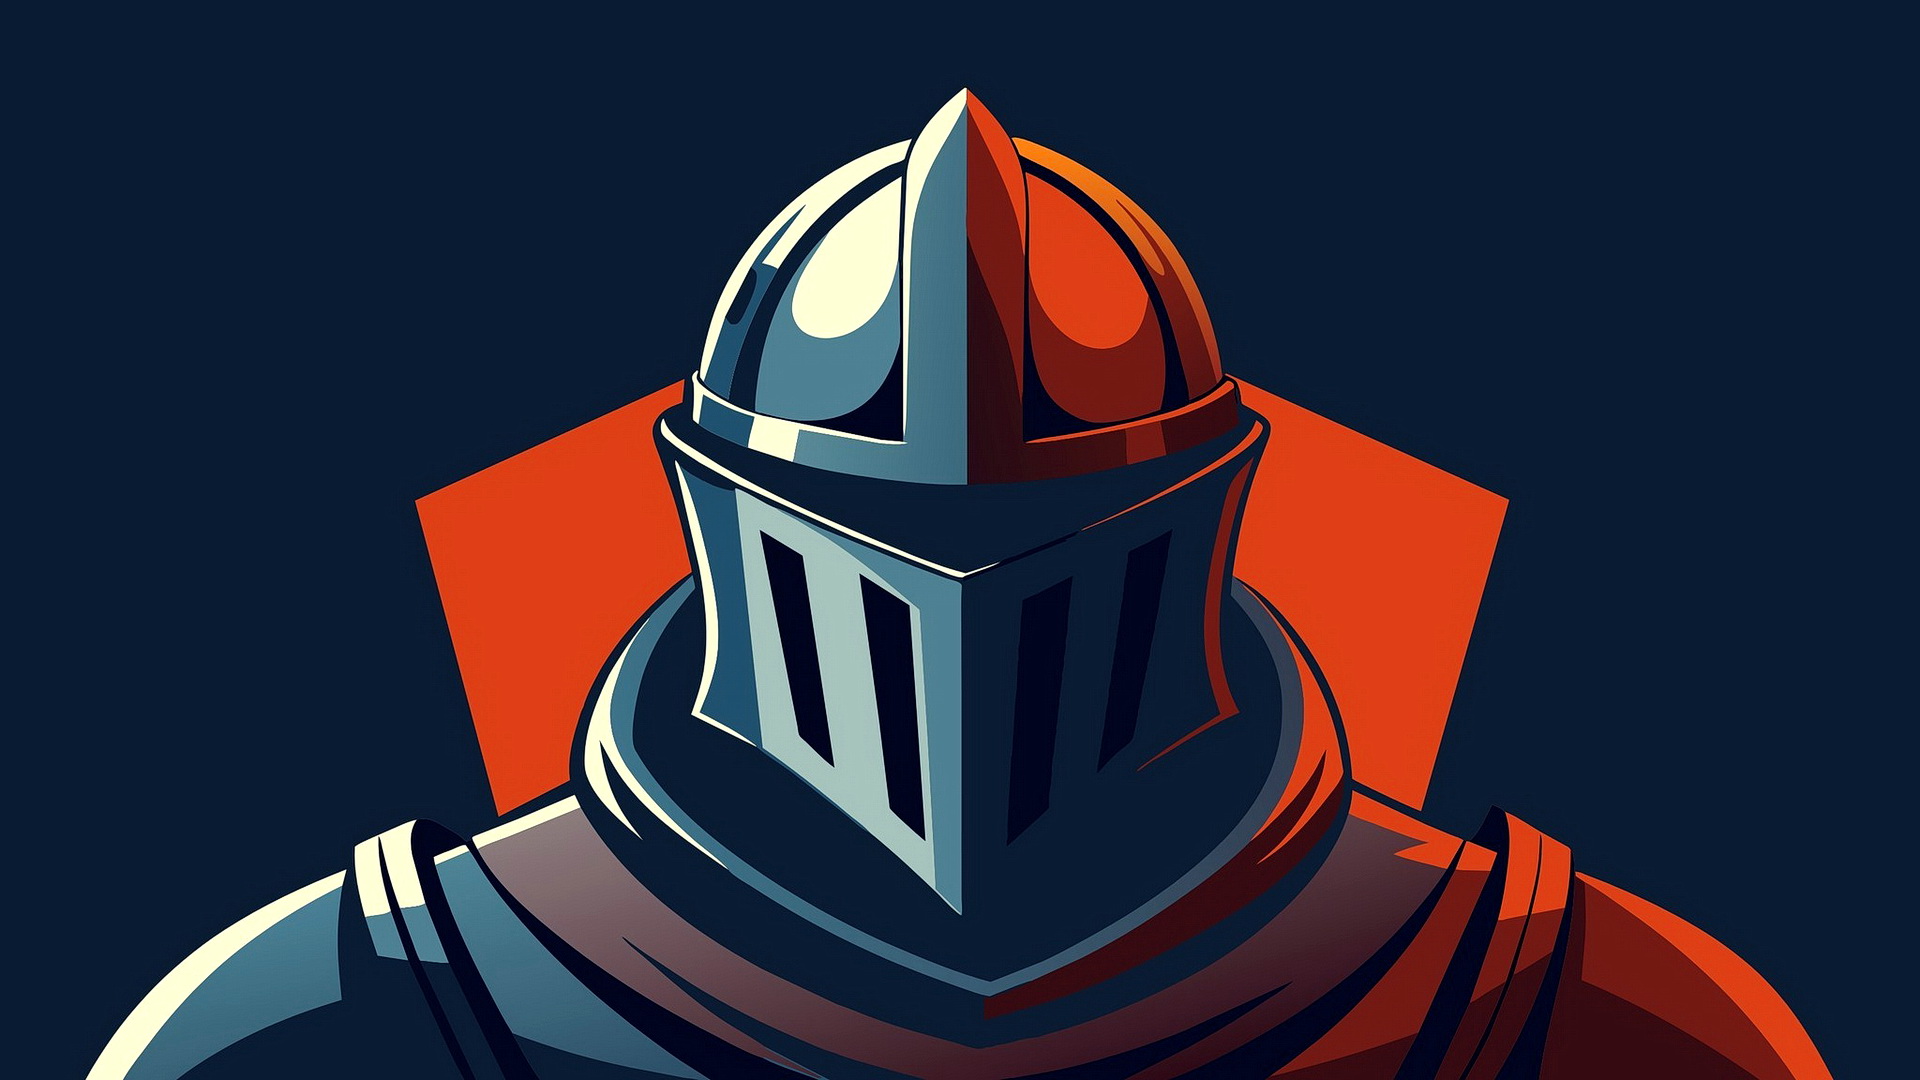 Drawing of a knight in a closed helmet and armor on a dark blue background